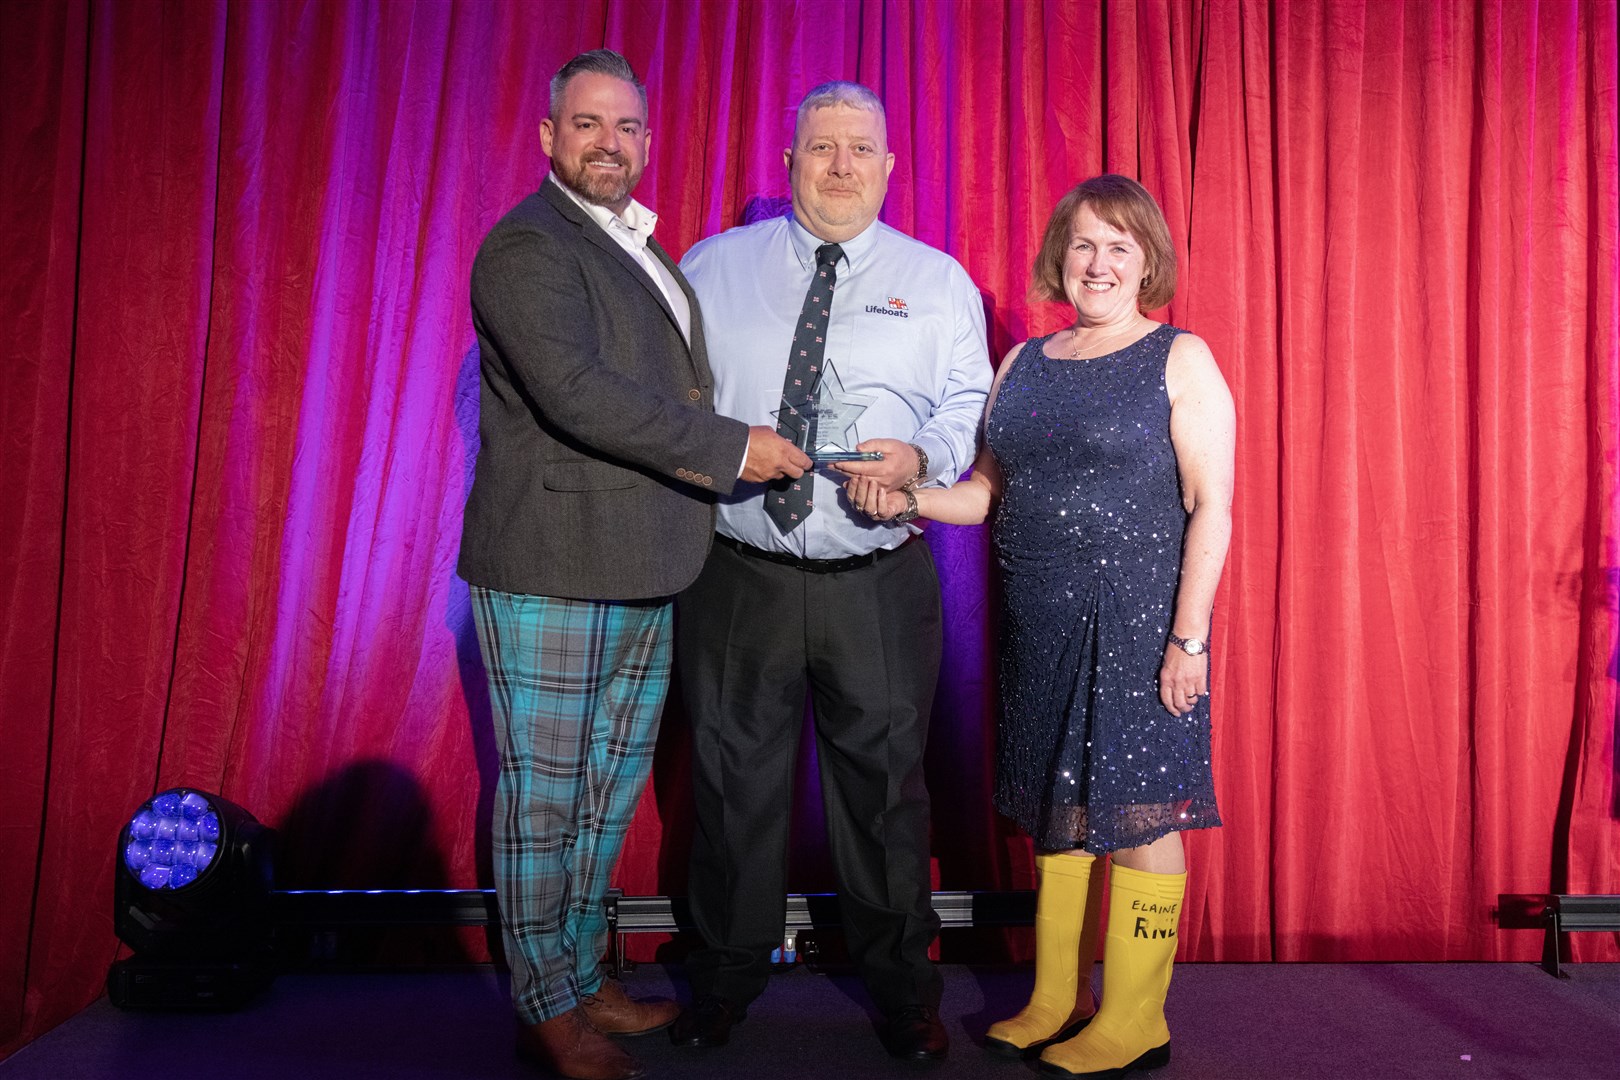 Buckie RNLI was awarded Emergency Services of the Year which was presented by Dave Acton (left), CEO of Motive Offshore to Davie Grant and Anne Scott. Picture: Beth Taylor.